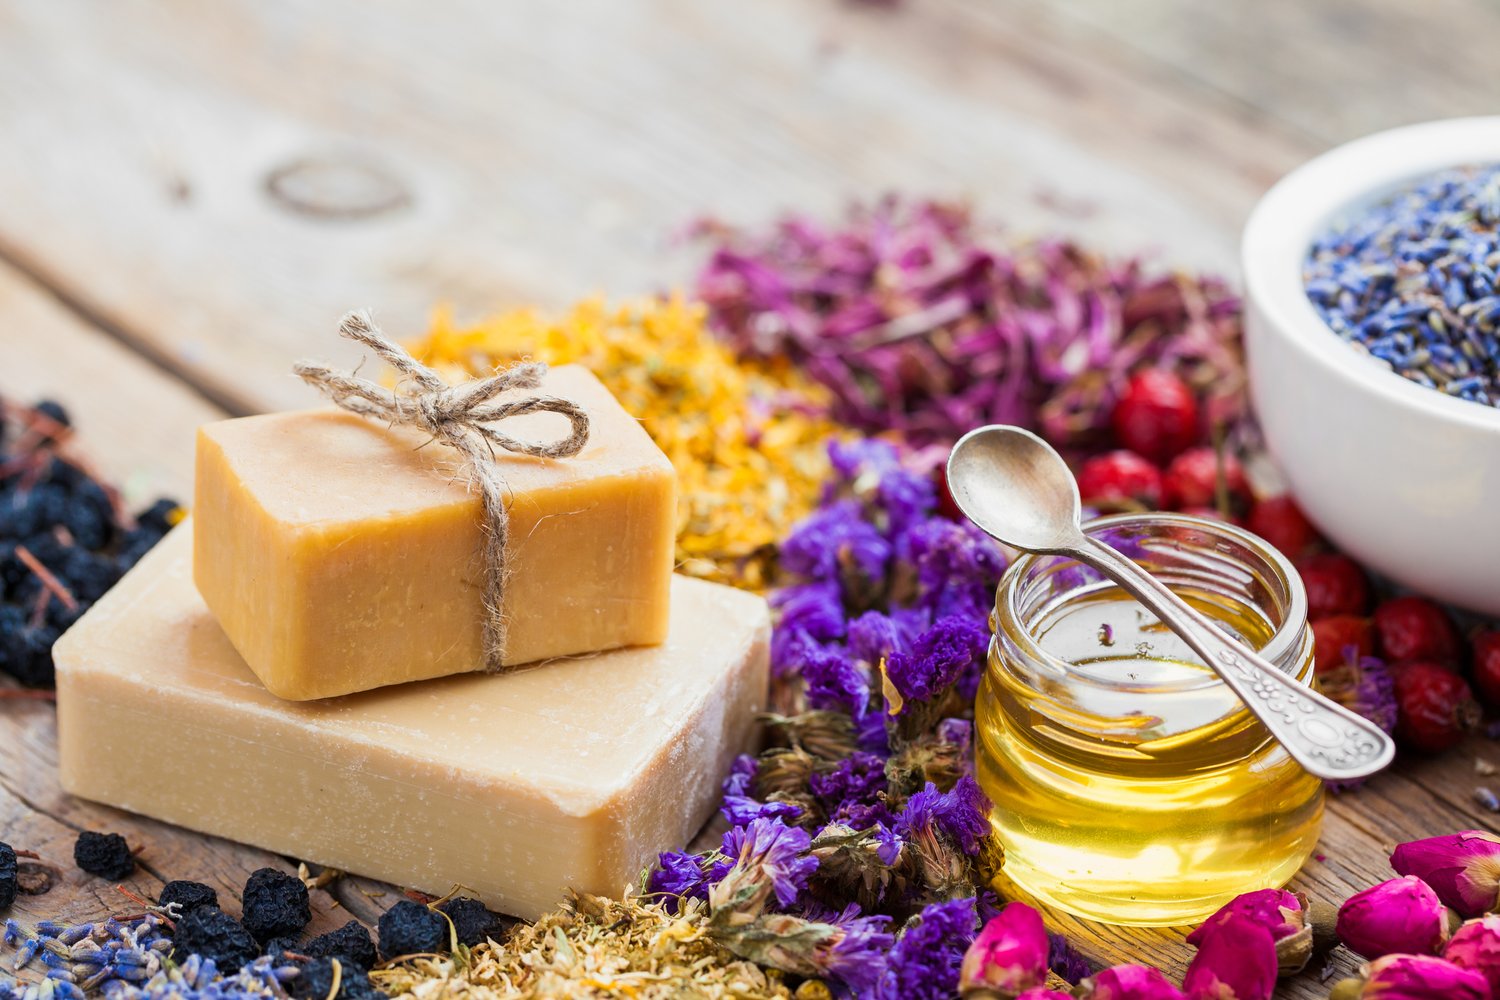 10 Best Essential Oils for Soap Making